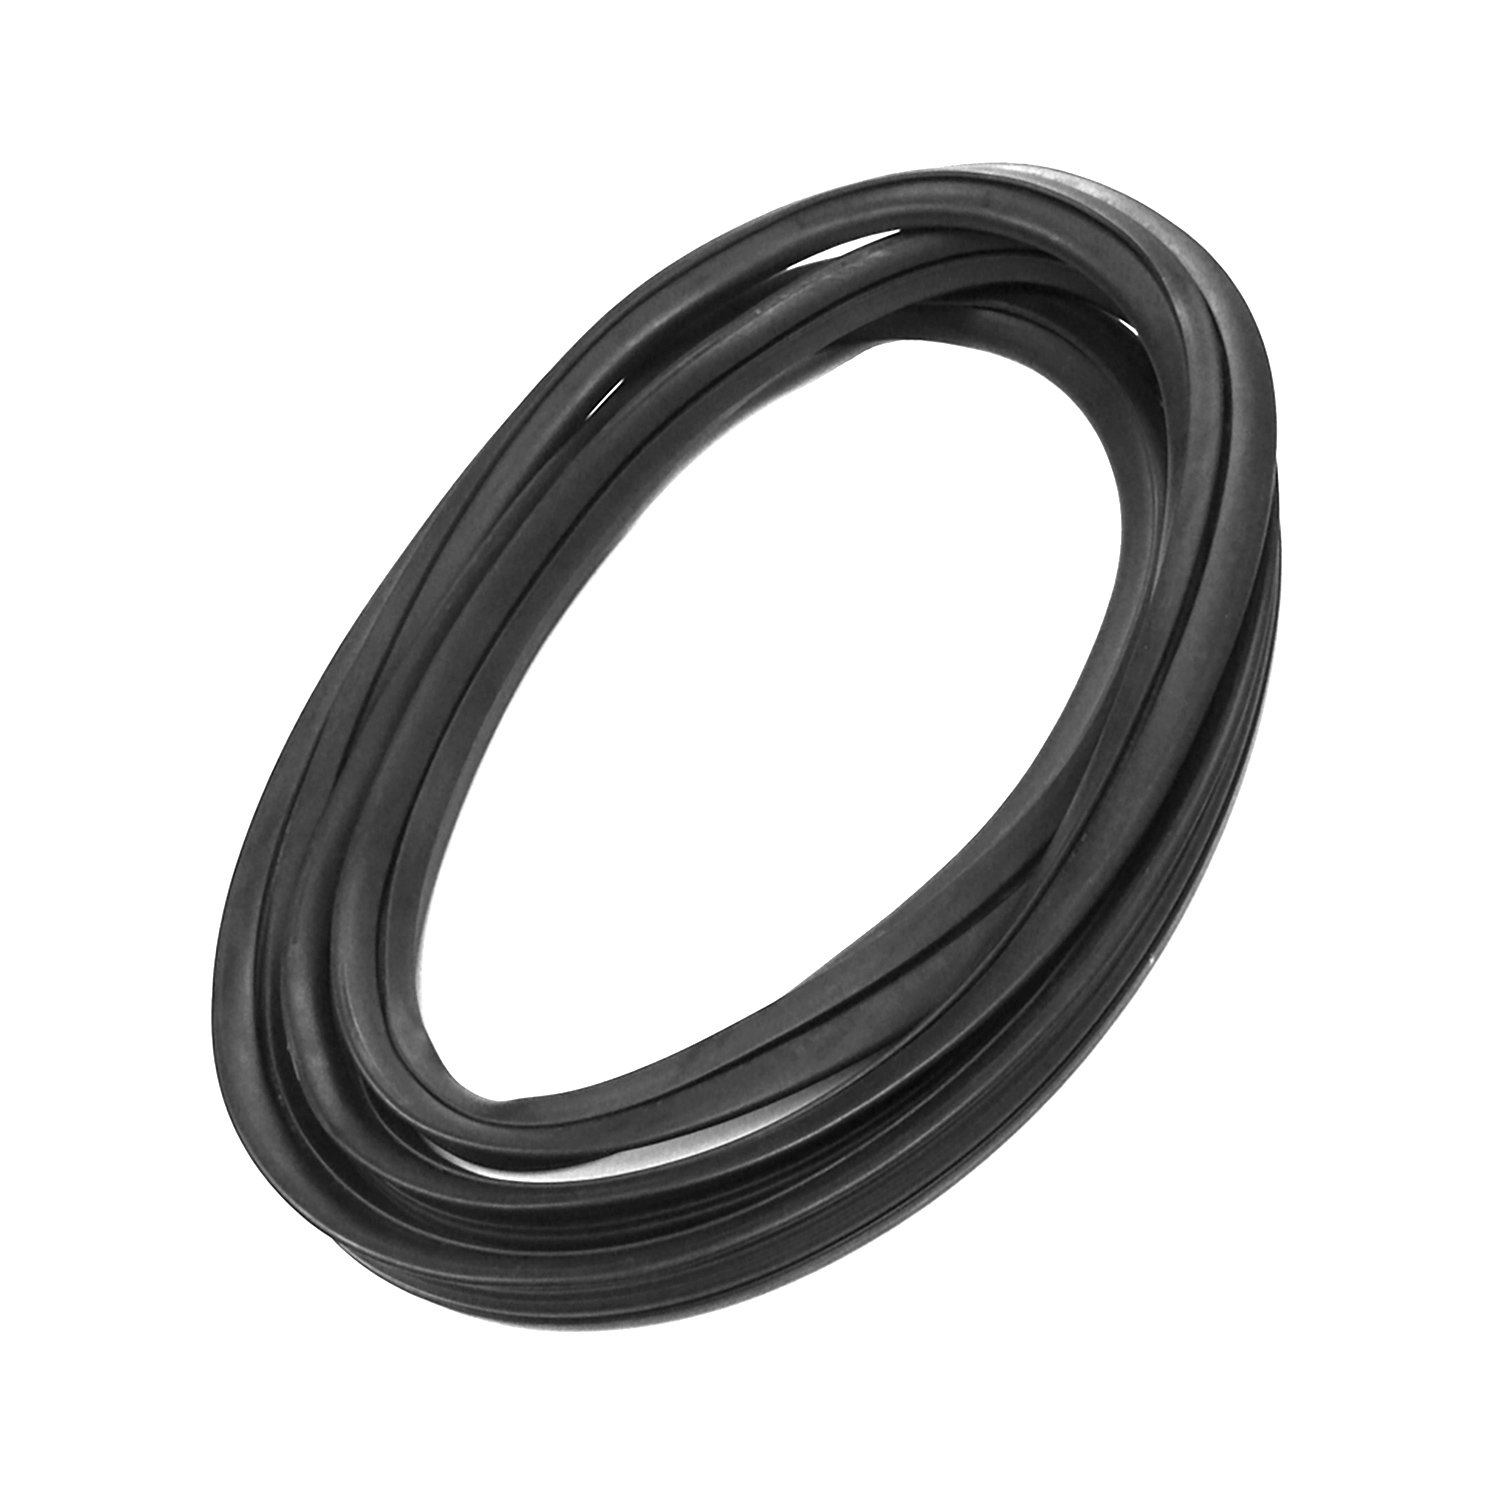 1978 GMC G25 Windshield Seal, 71-80 GM Full Size Van With Trim Groove, Each-VWS 7324-A